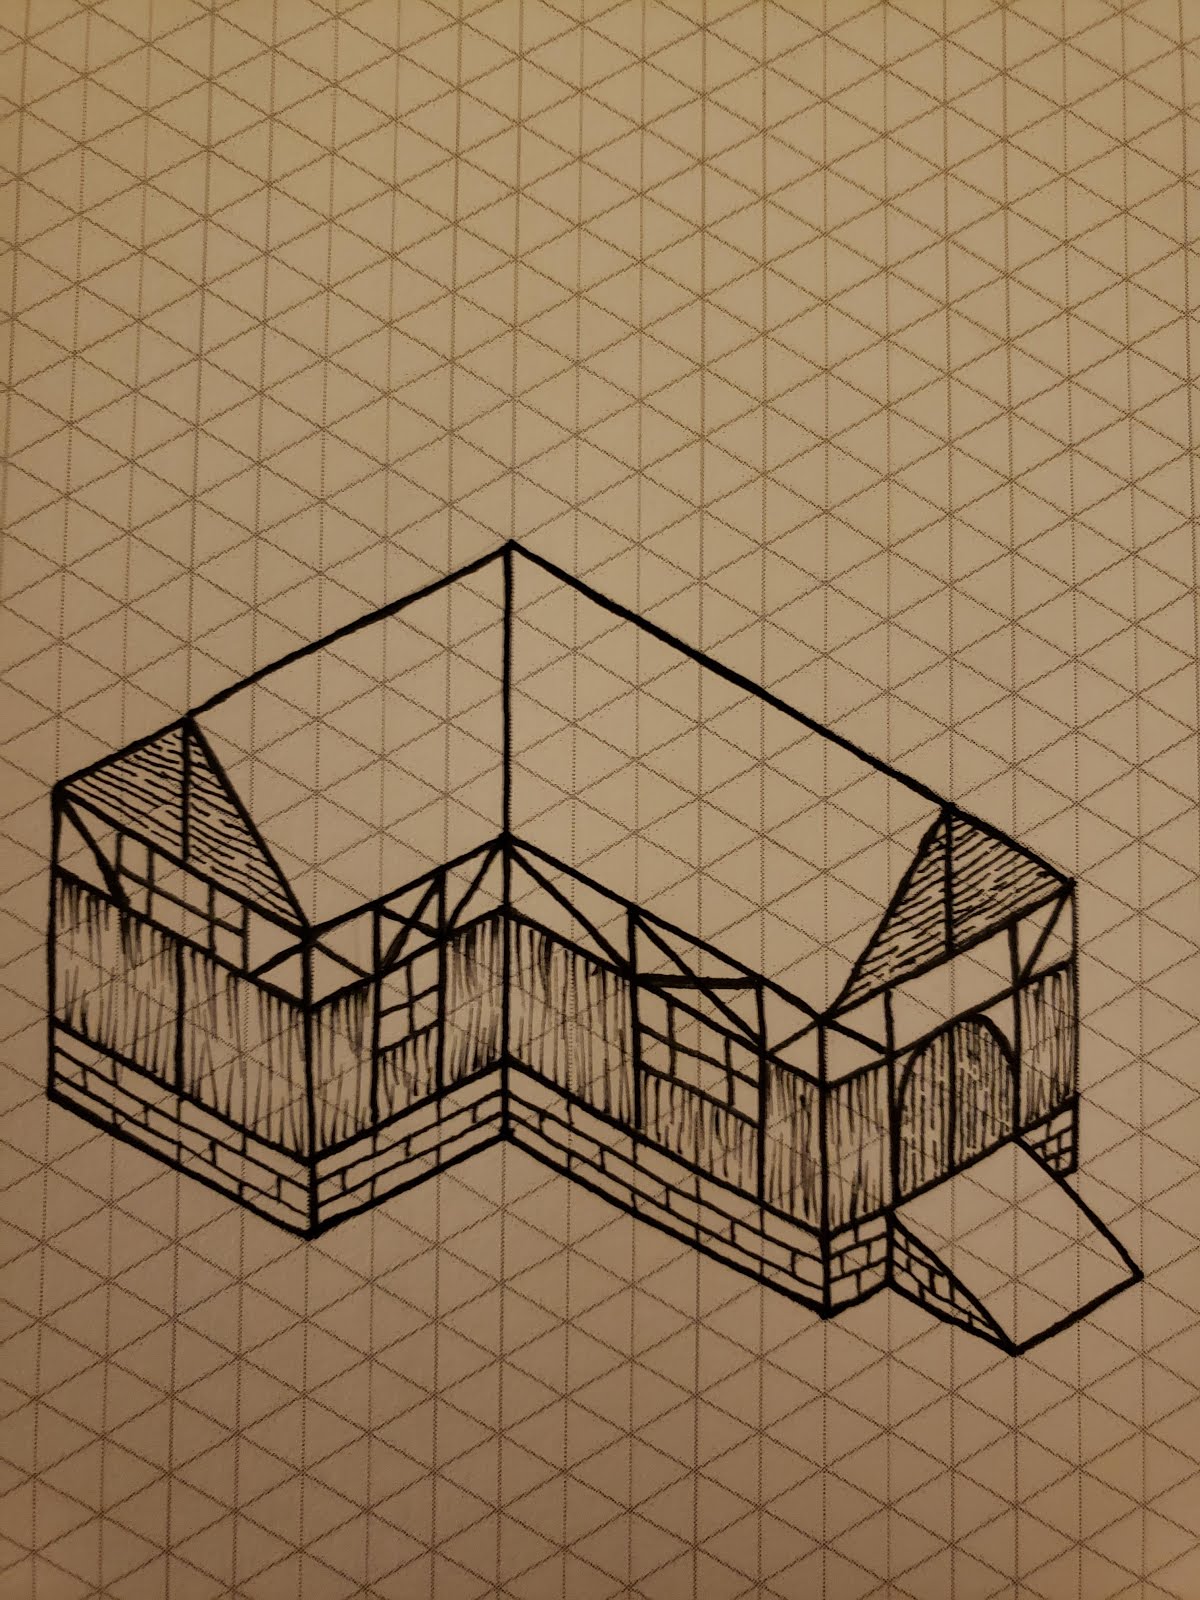 Fun with Isometric Graph Paper